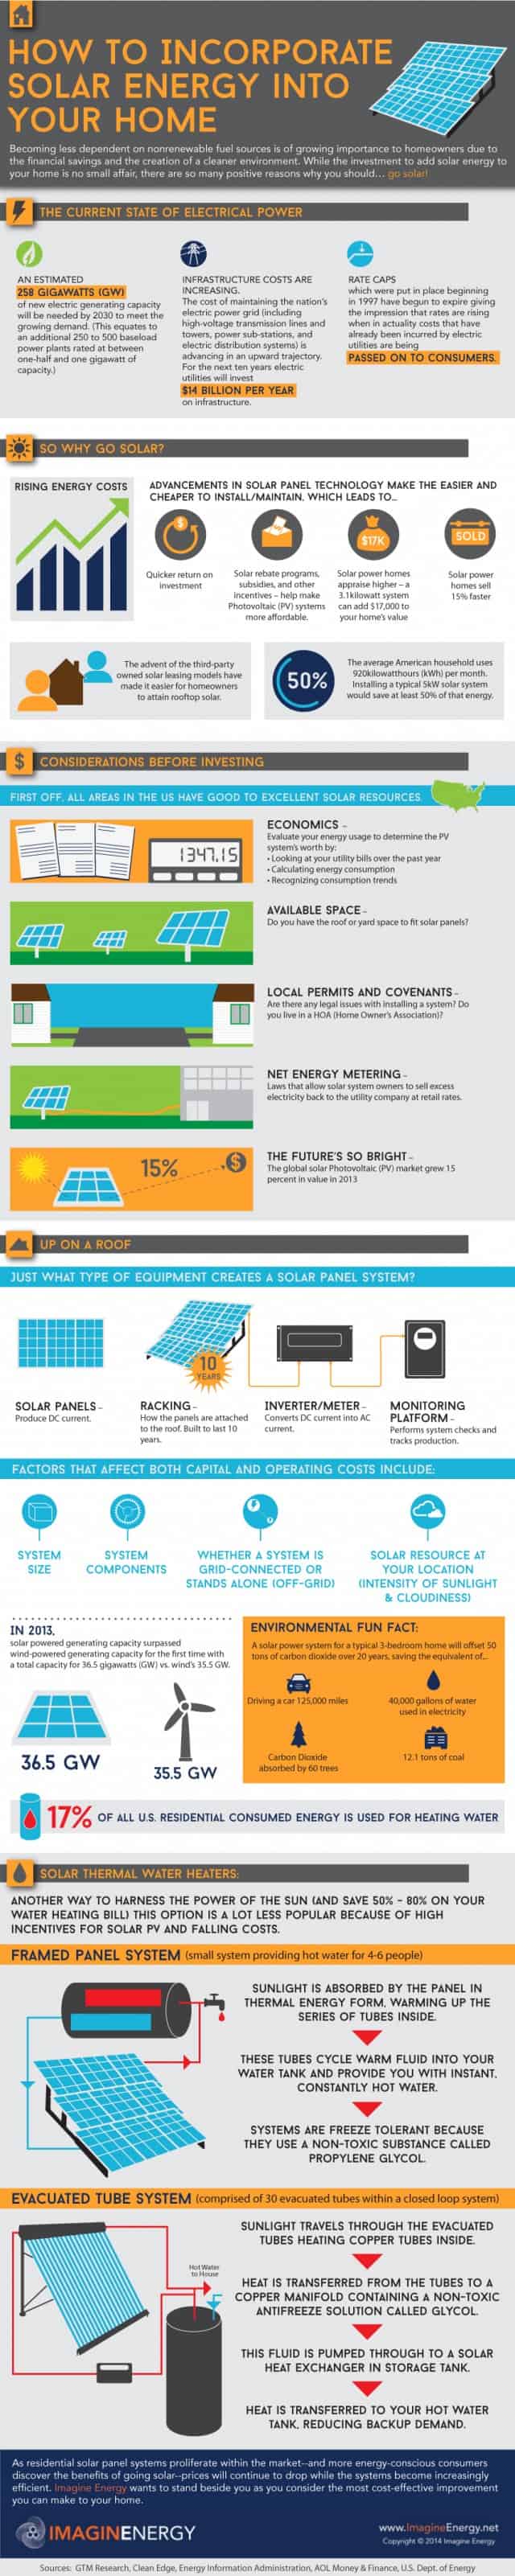 How to Incorporate Solar Energy into Your Home